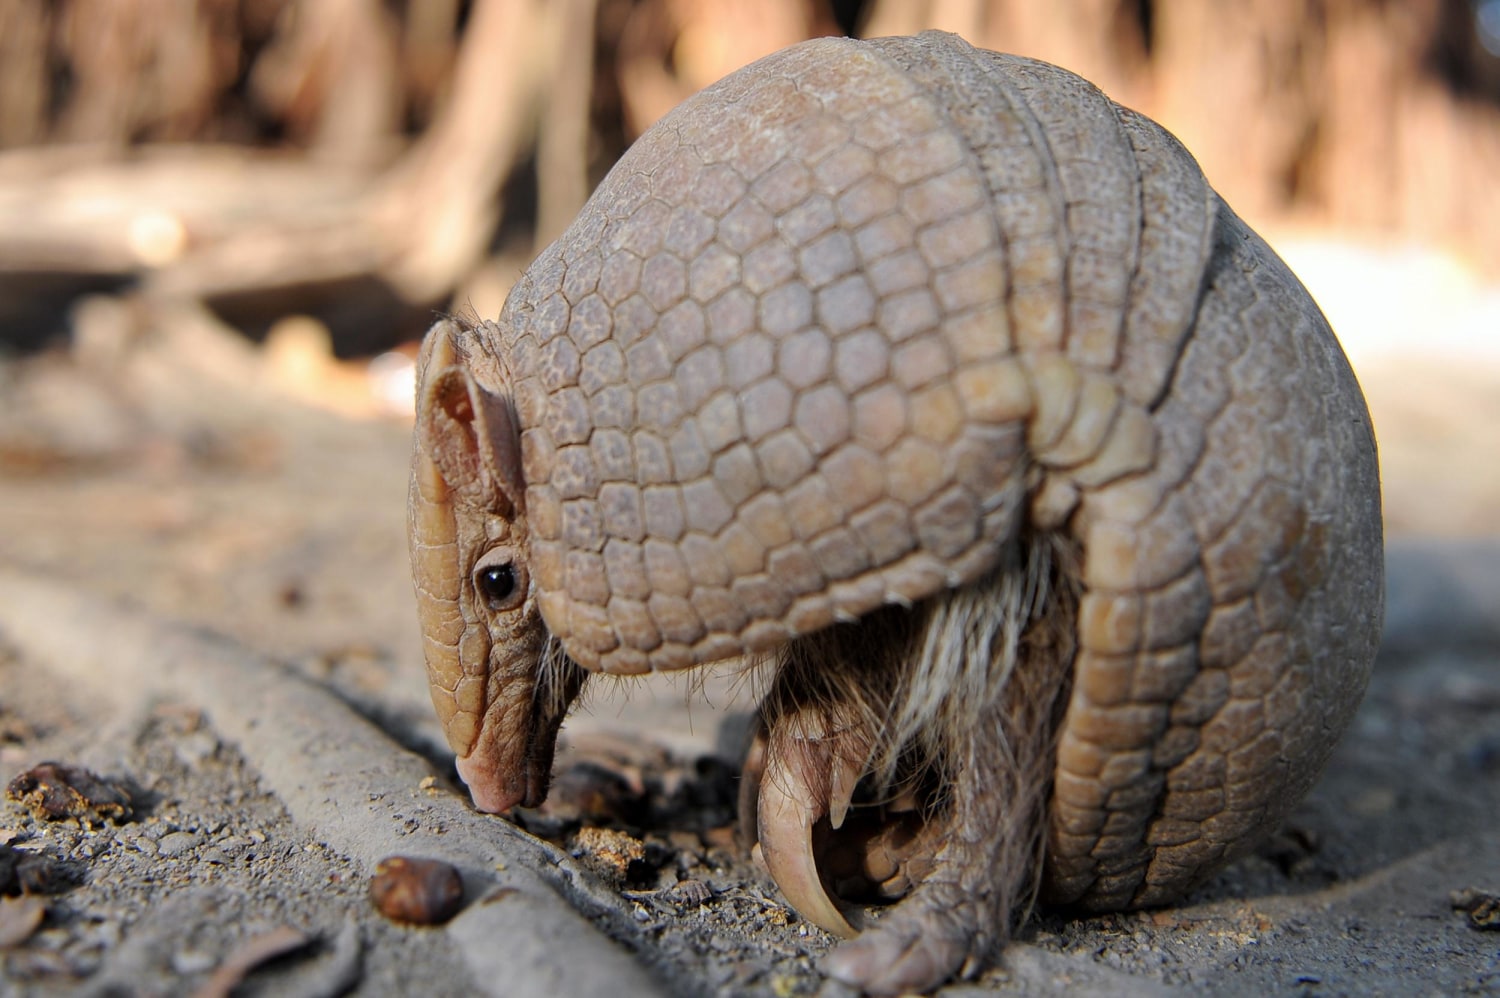 A 9,000-year-old Recipe For Roast Armadillo